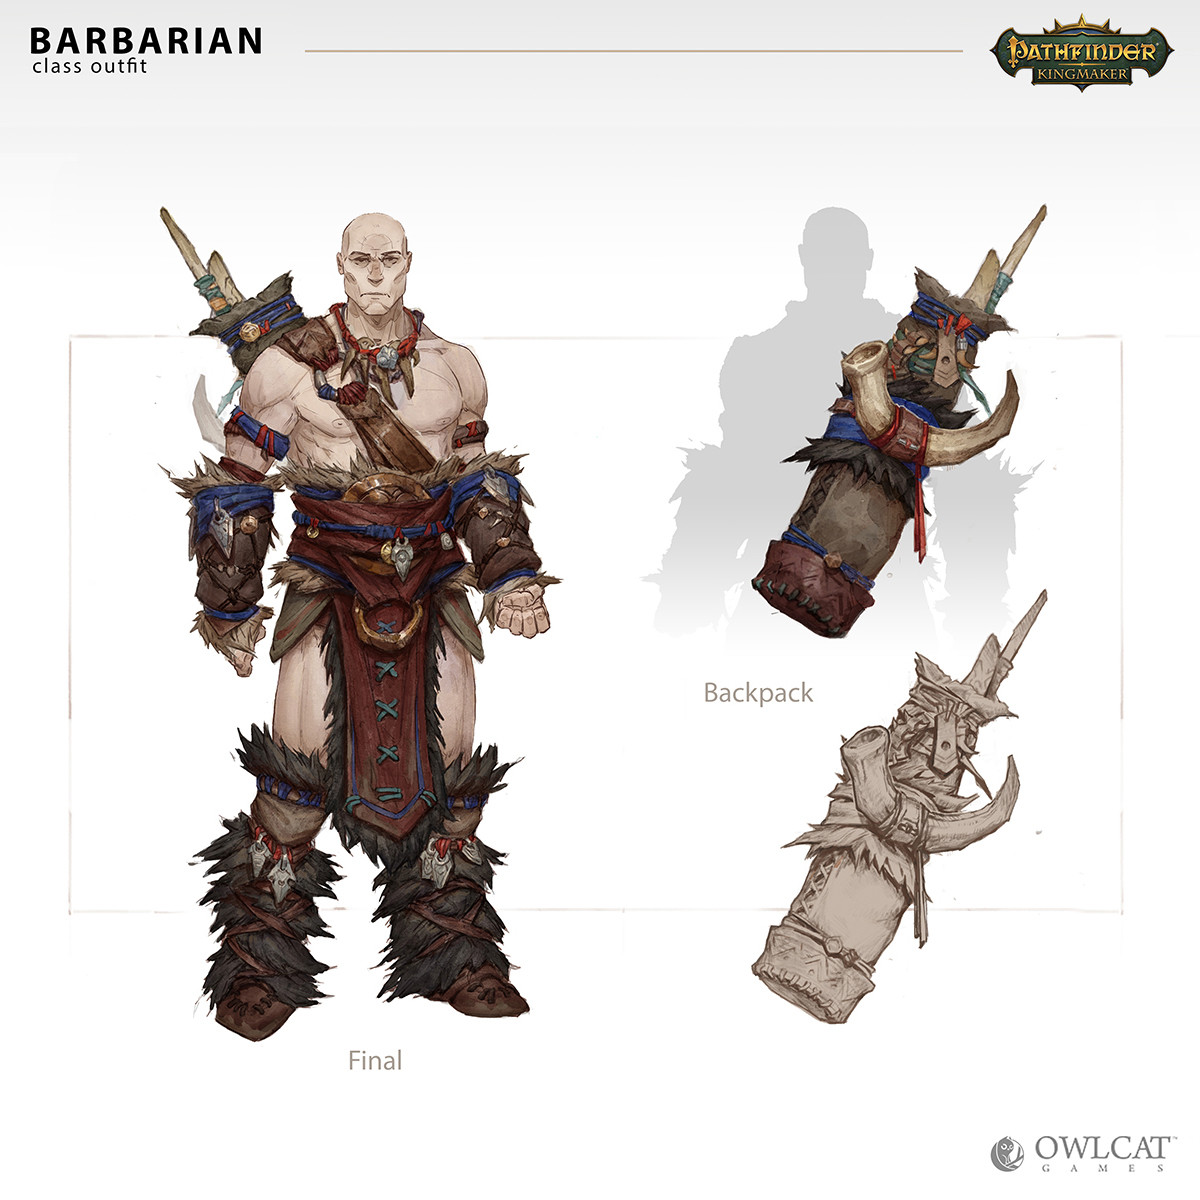 ArtStation - Barbarian class outfit.